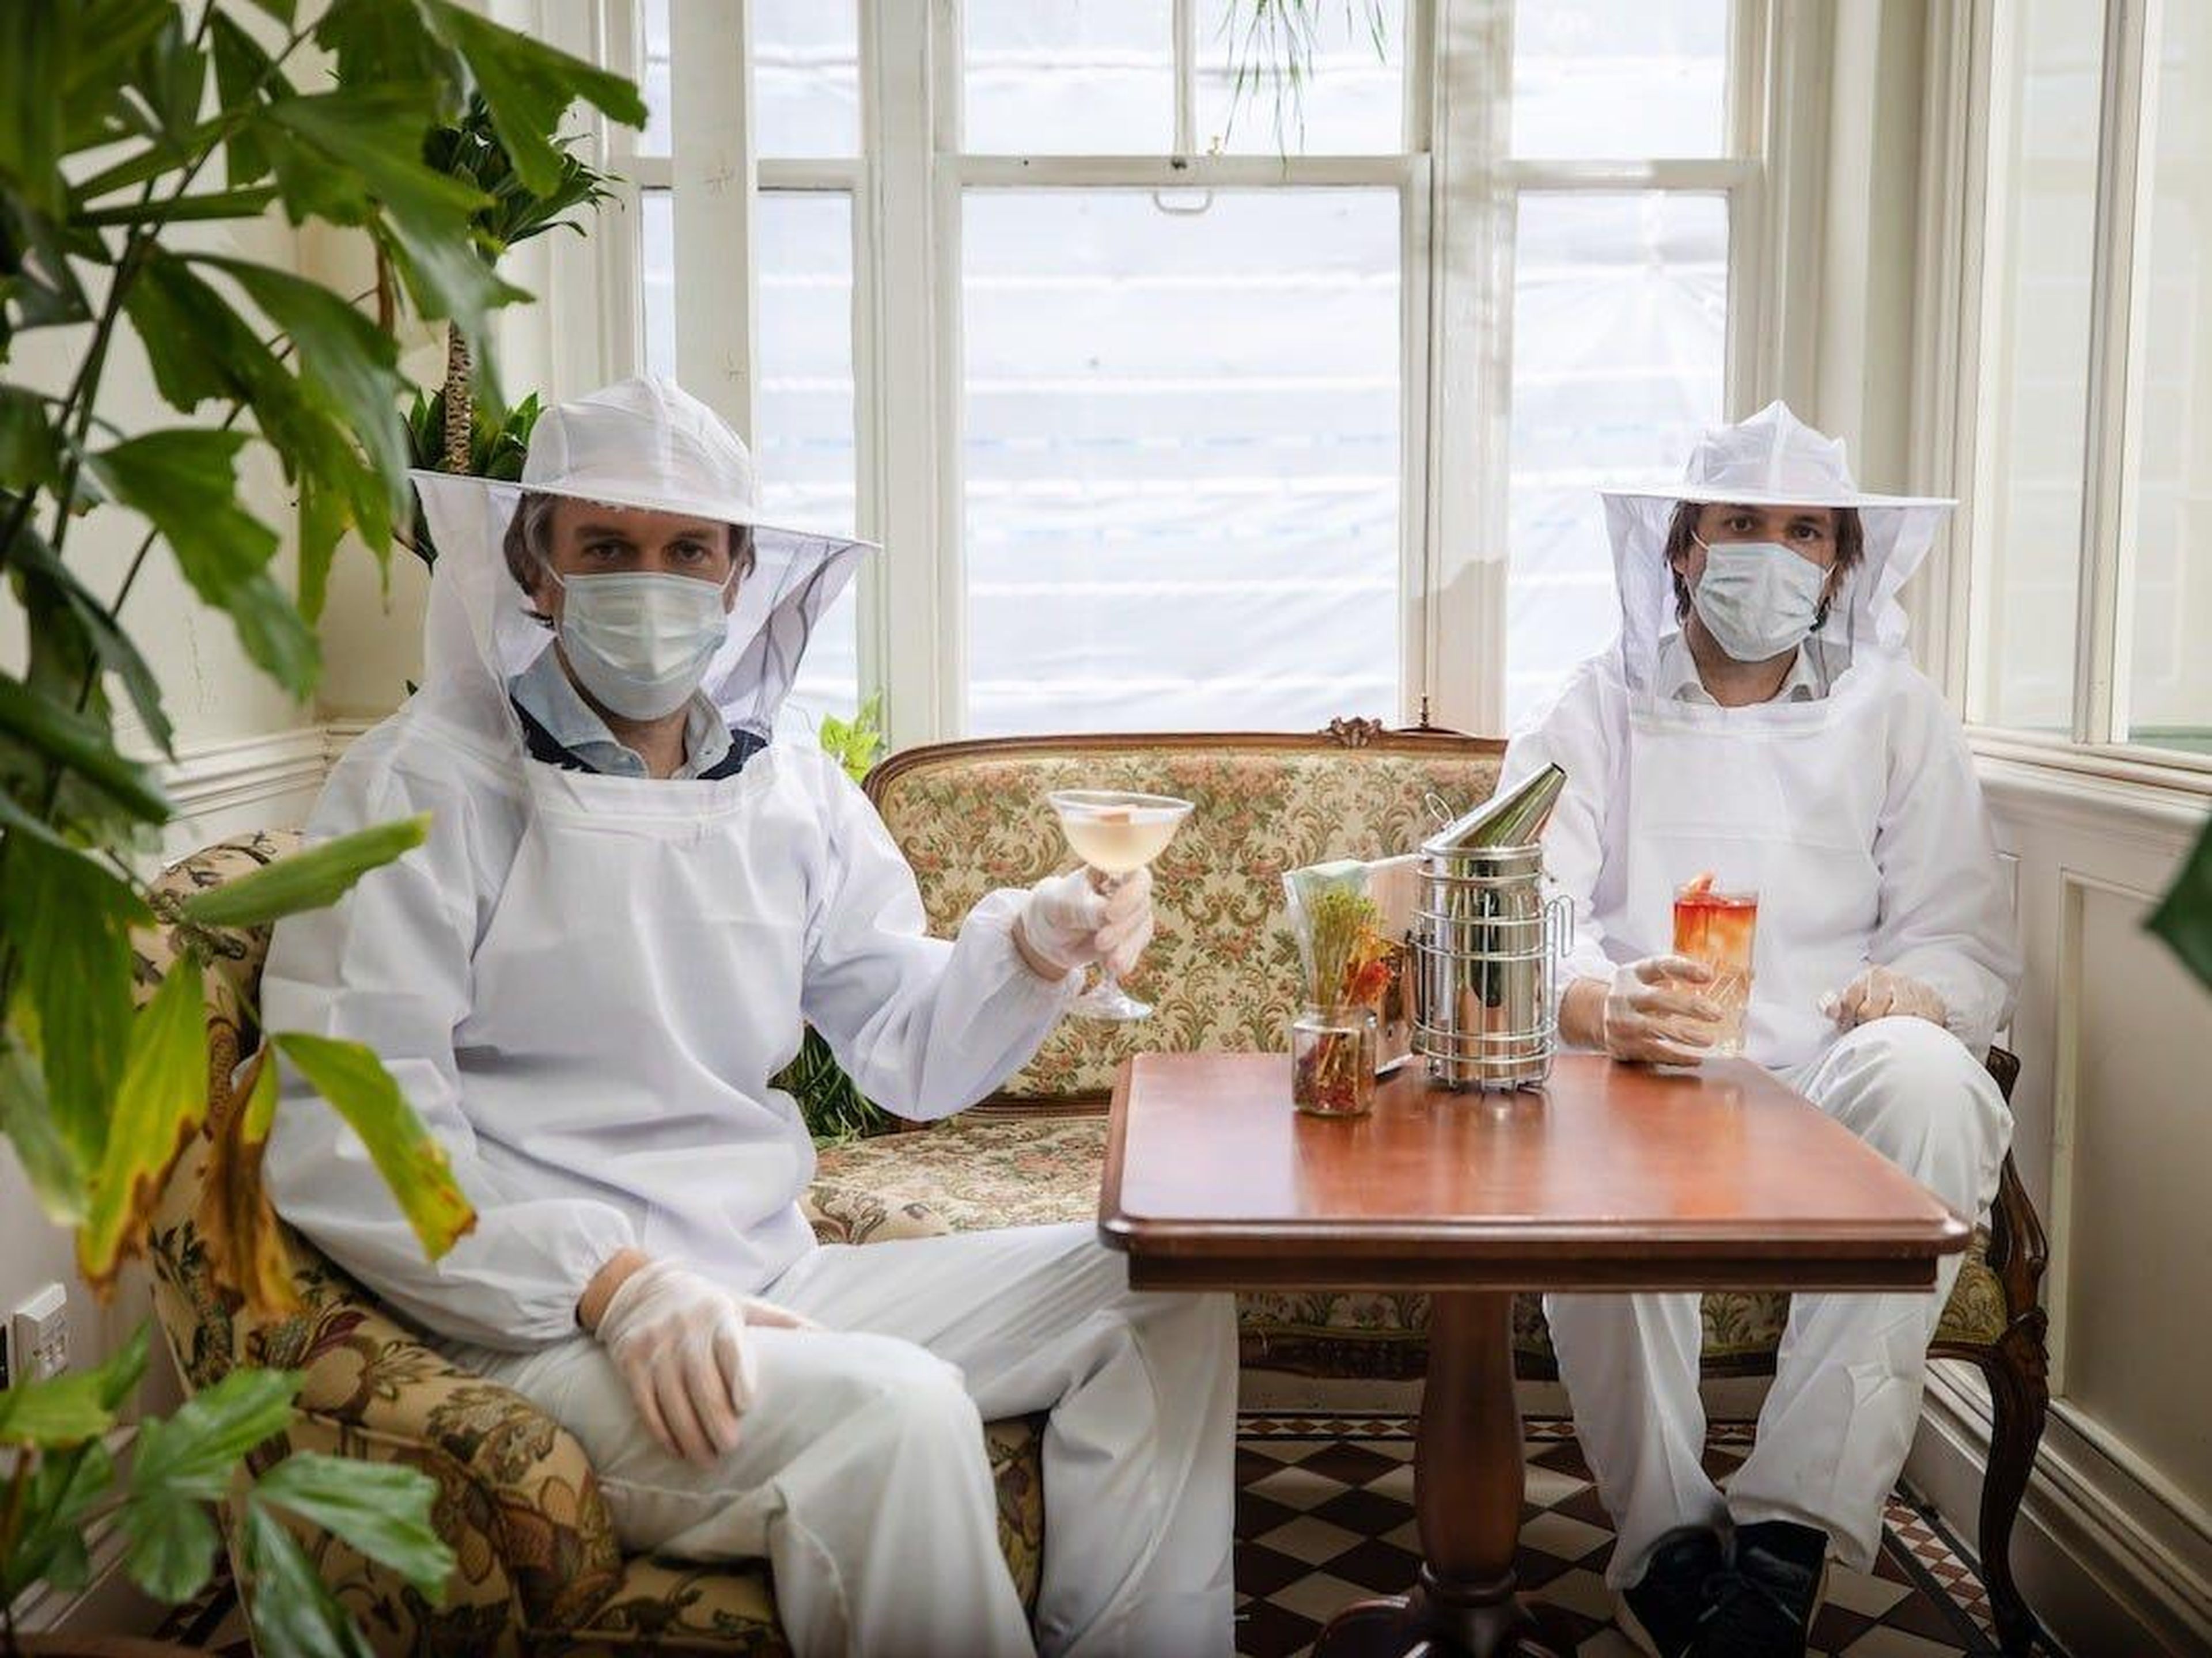 Co-founders Charlie Gilkes and Duncan Stirling wear the beekeeping suits.